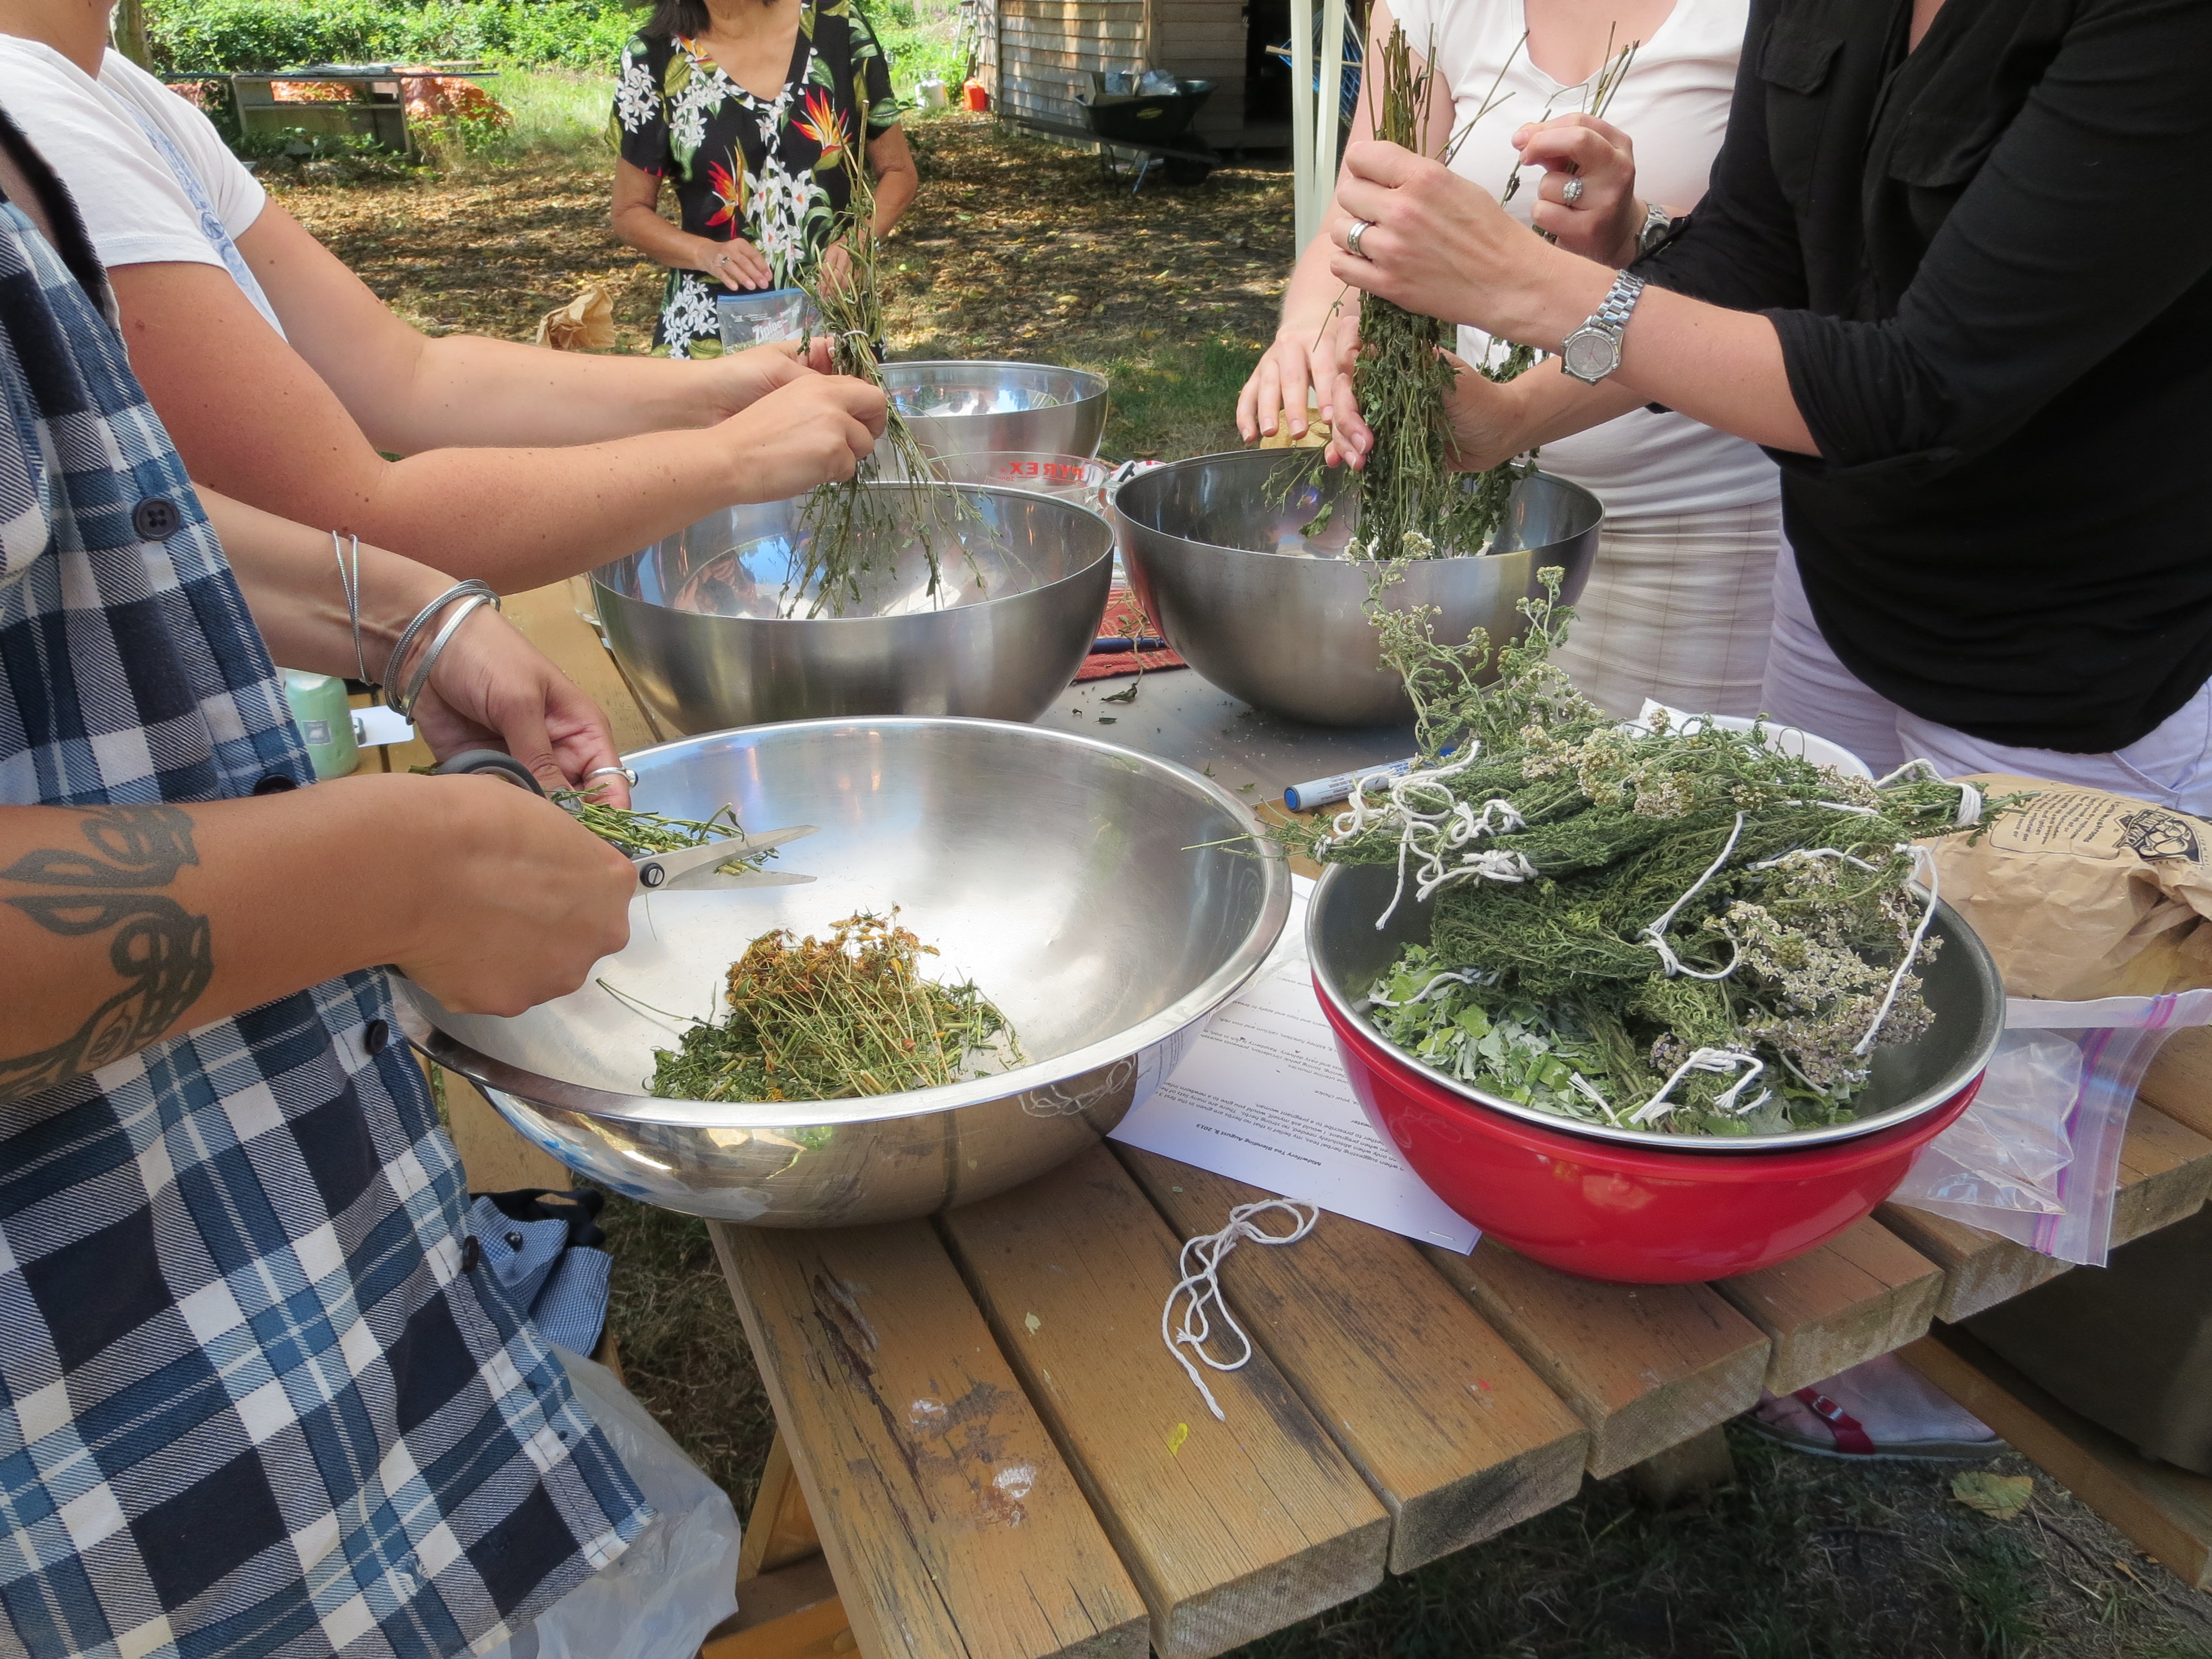 UBC Midwifery students and community members blend dried medicine plants from the Indigenous Health Garden for tea in a workshop.